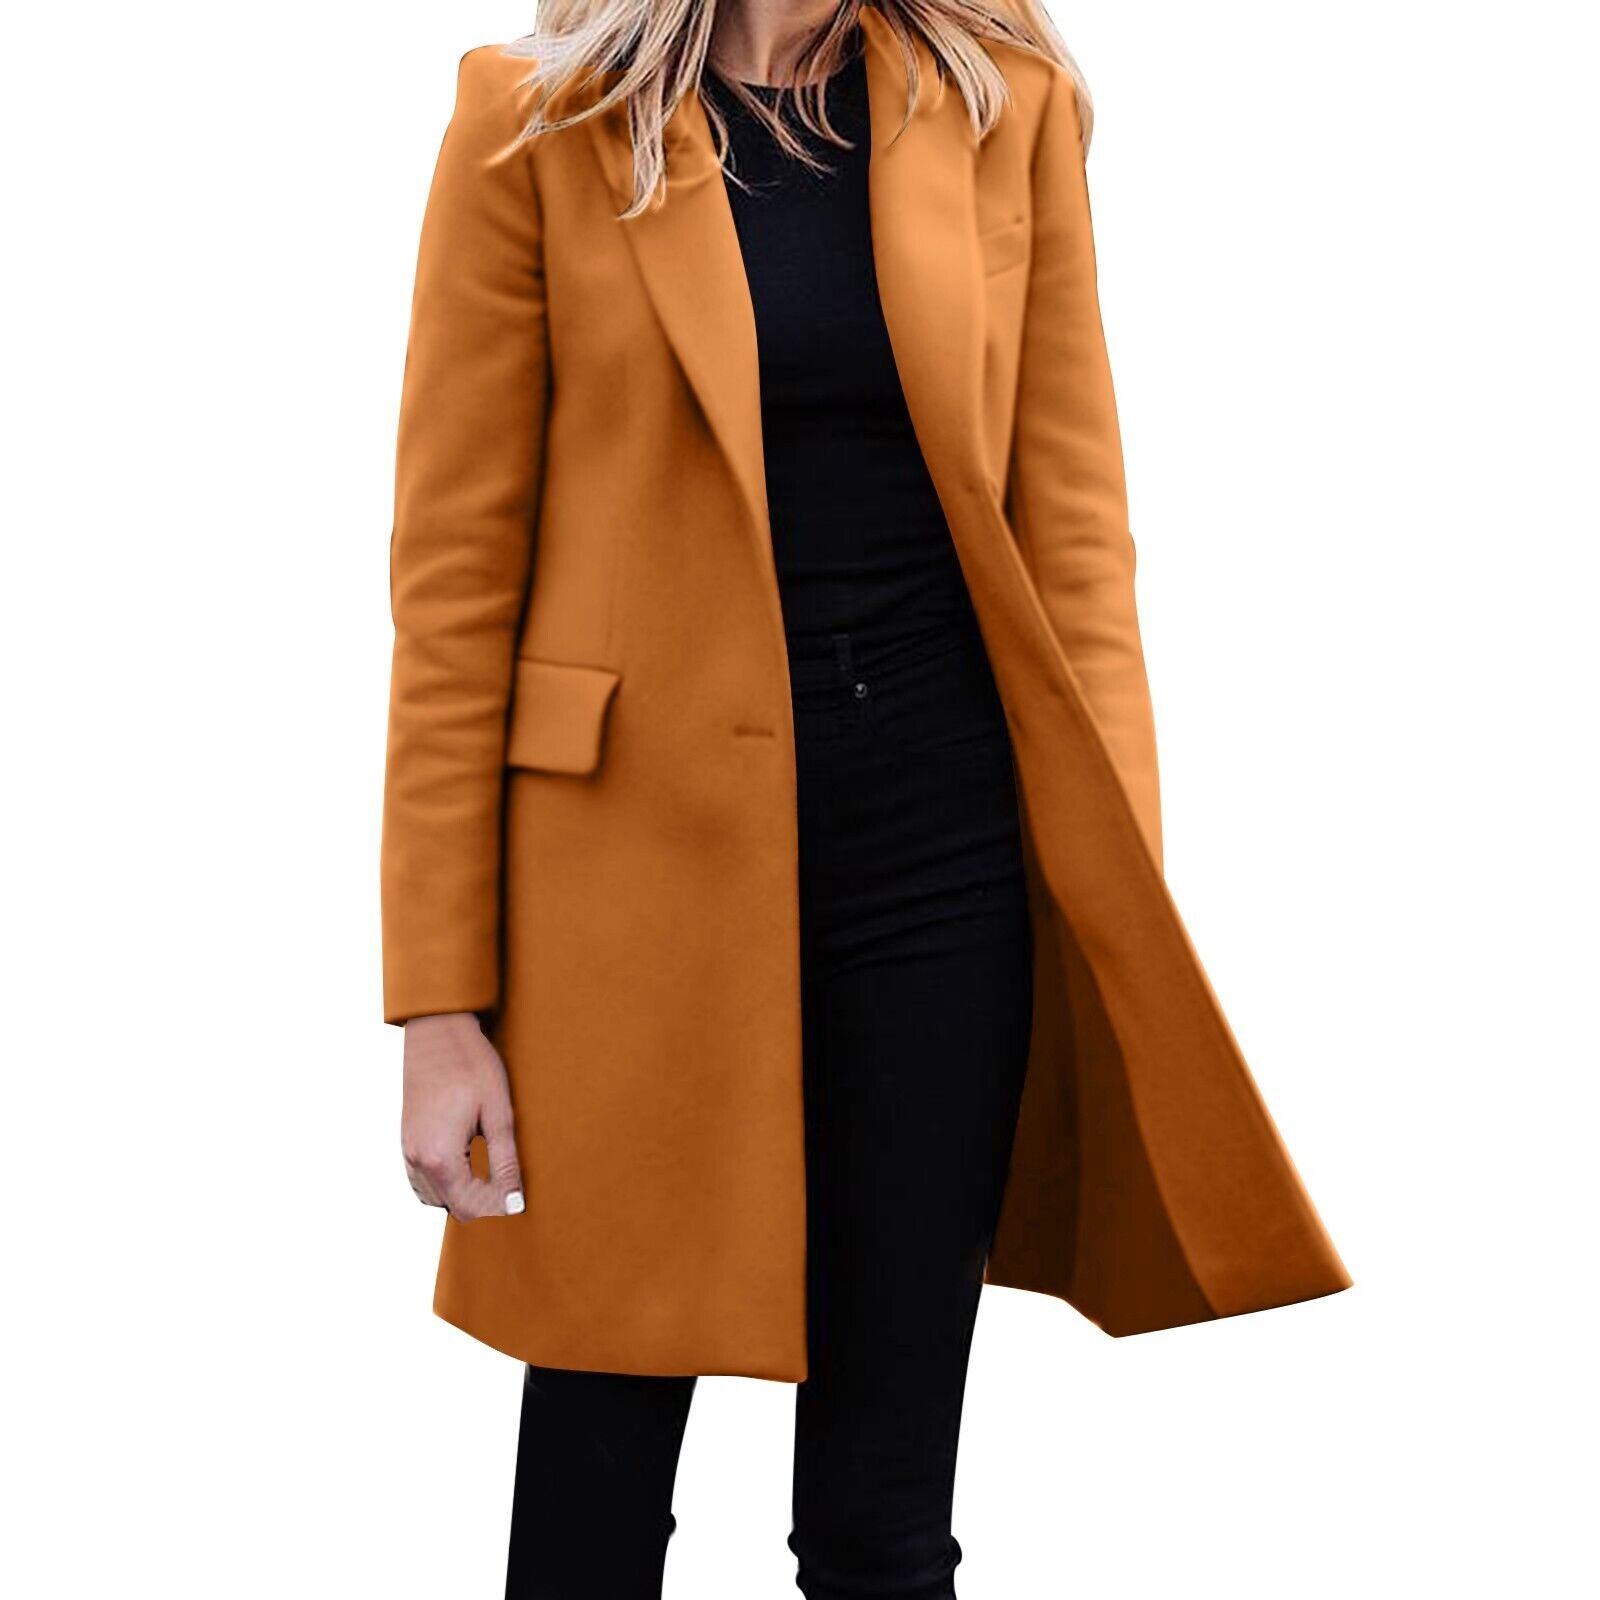 Stay Fashionable and Cozy with Our Women's Petite Long Slim Coat - Perfect for Winter!